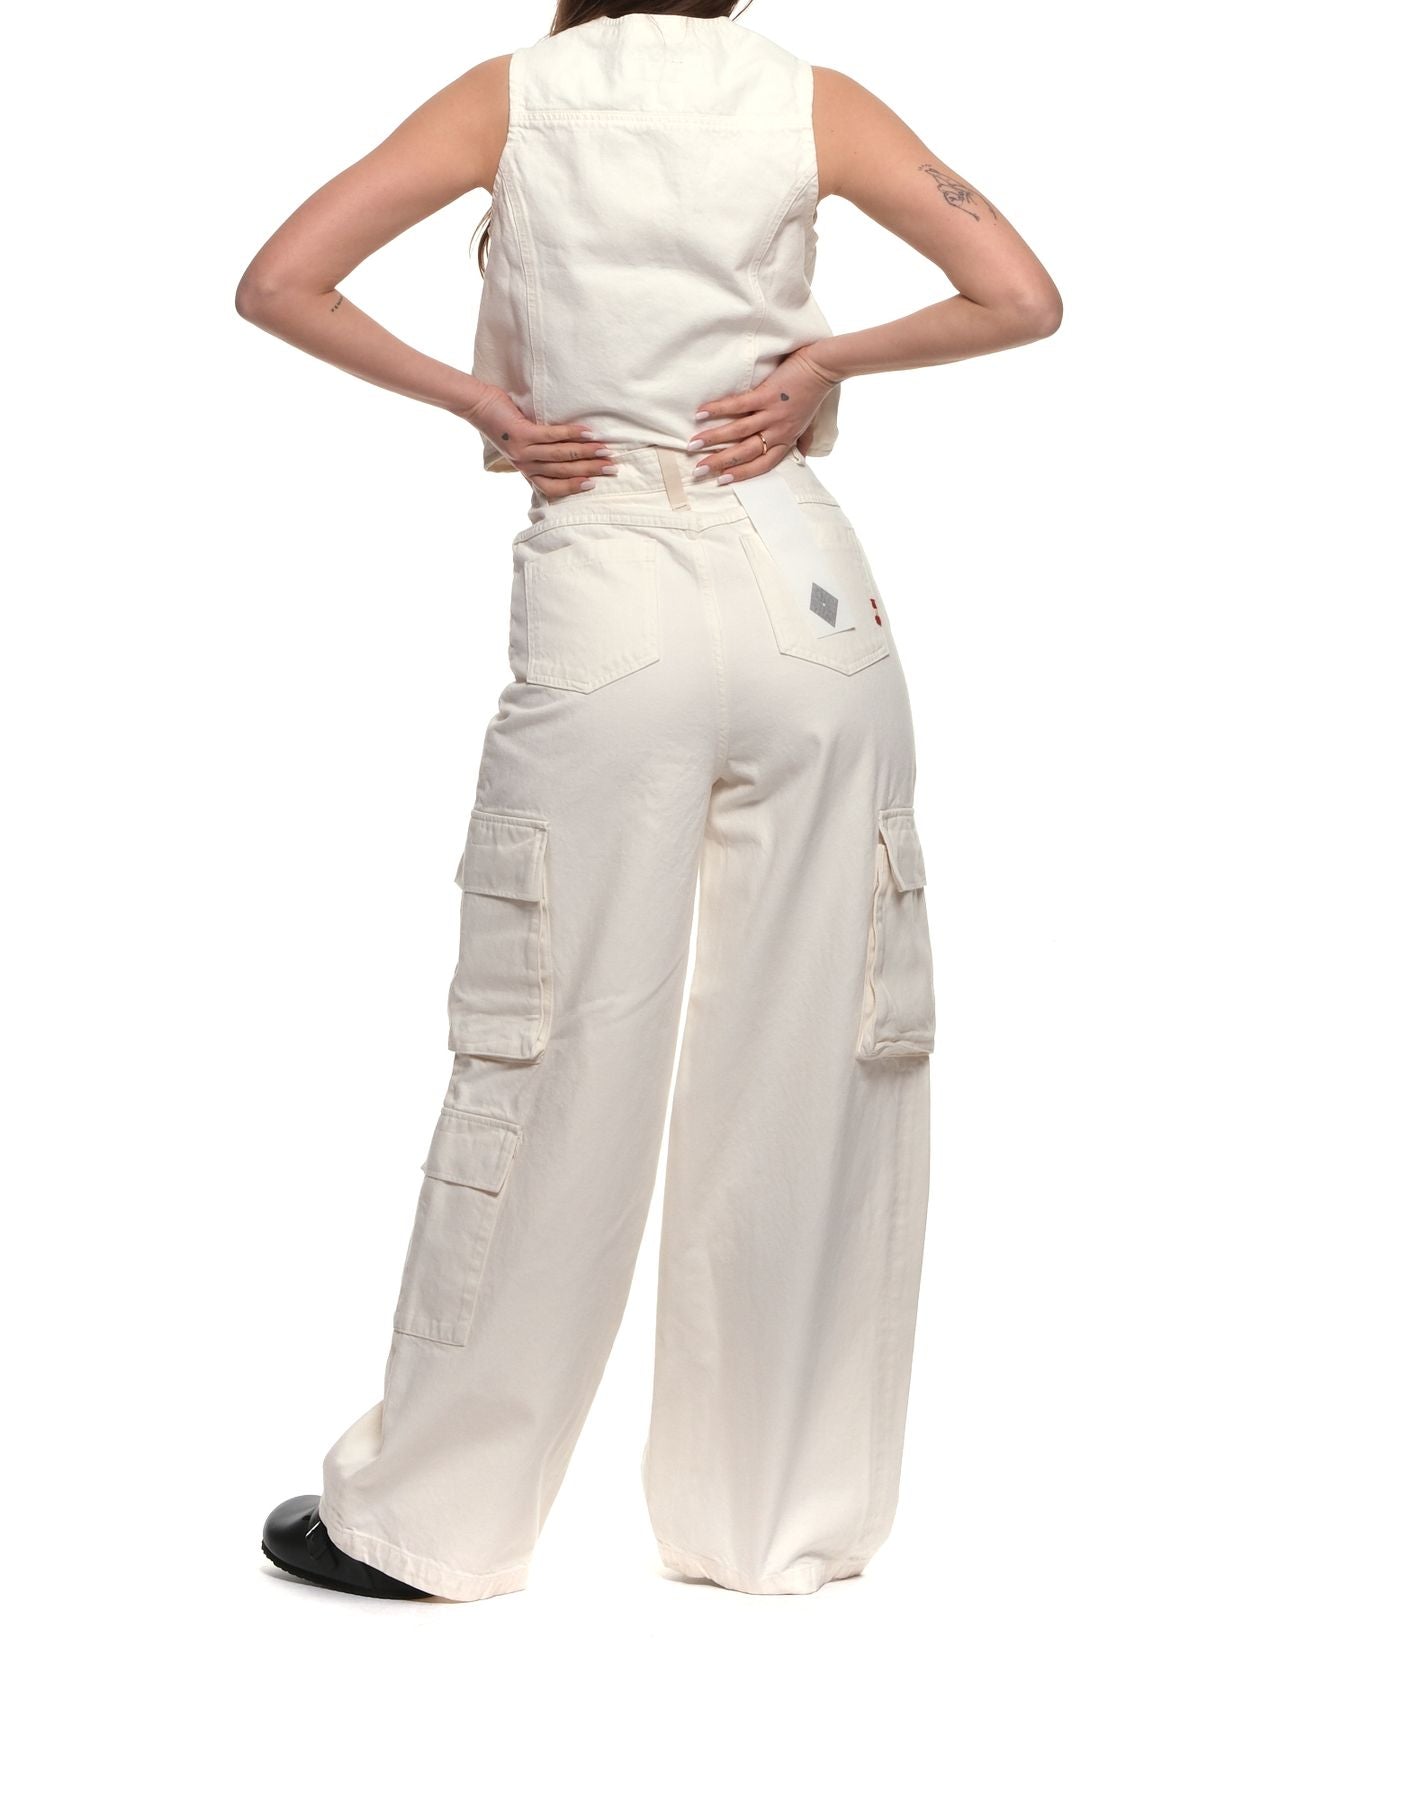 Jeans woman AMD065P3200111 WHITE Amish